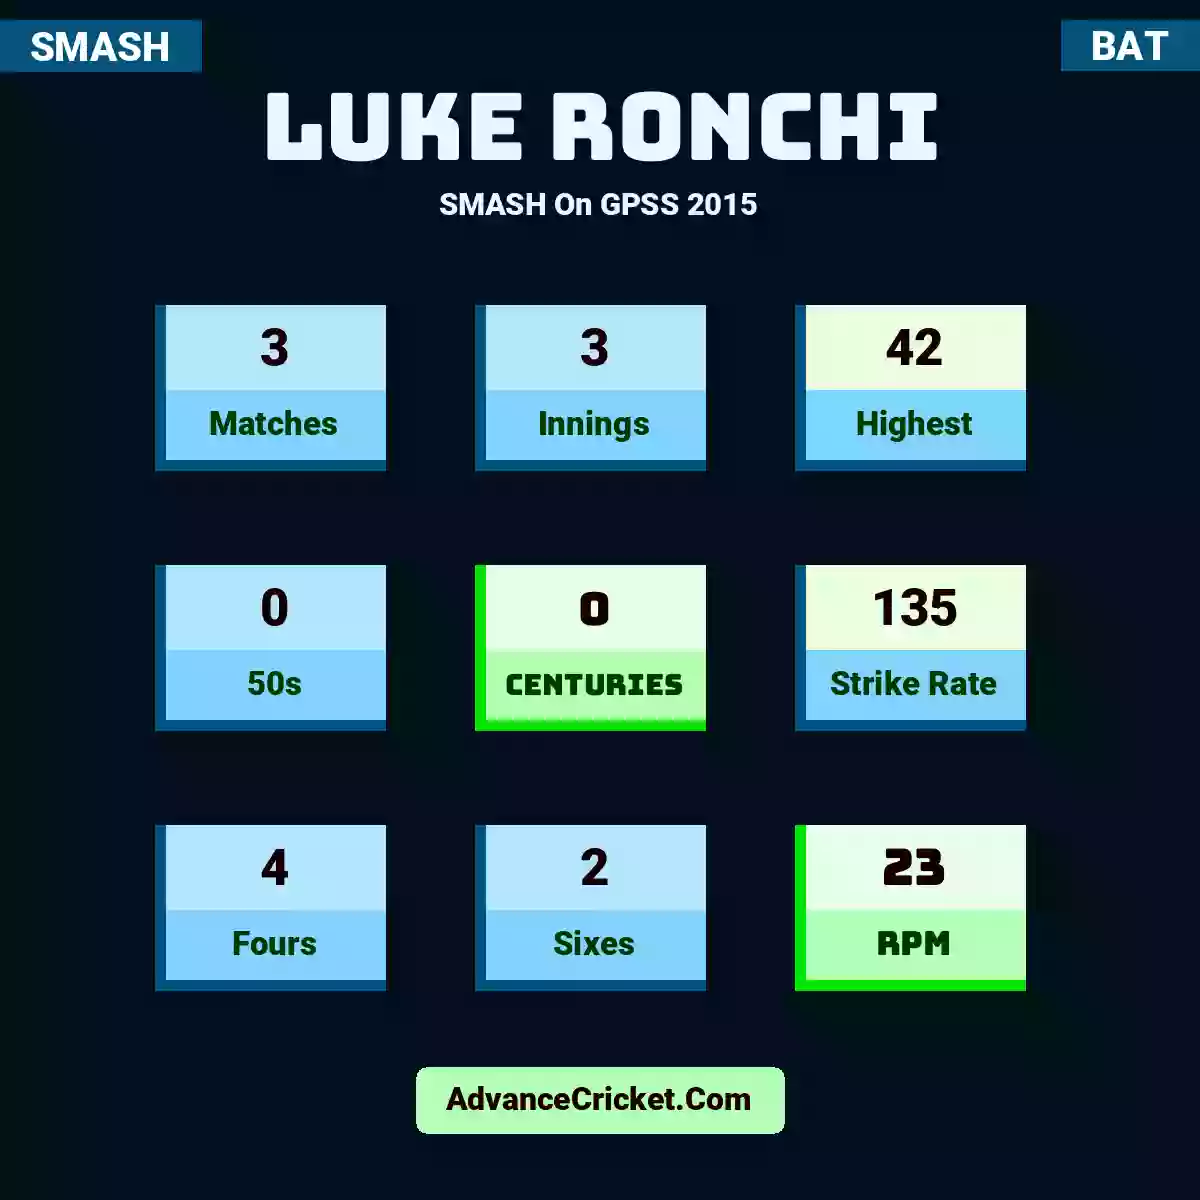 Luke Ronchi SMASH  On GPSS 2015, Luke Ronchi played 3 matches, scored 42 runs as highest, 0 half-centuries, and 0 centuries, with a strike rate of 135. L.Ronchi hit 4 fours and 2 sixes, with an RPM of 23.